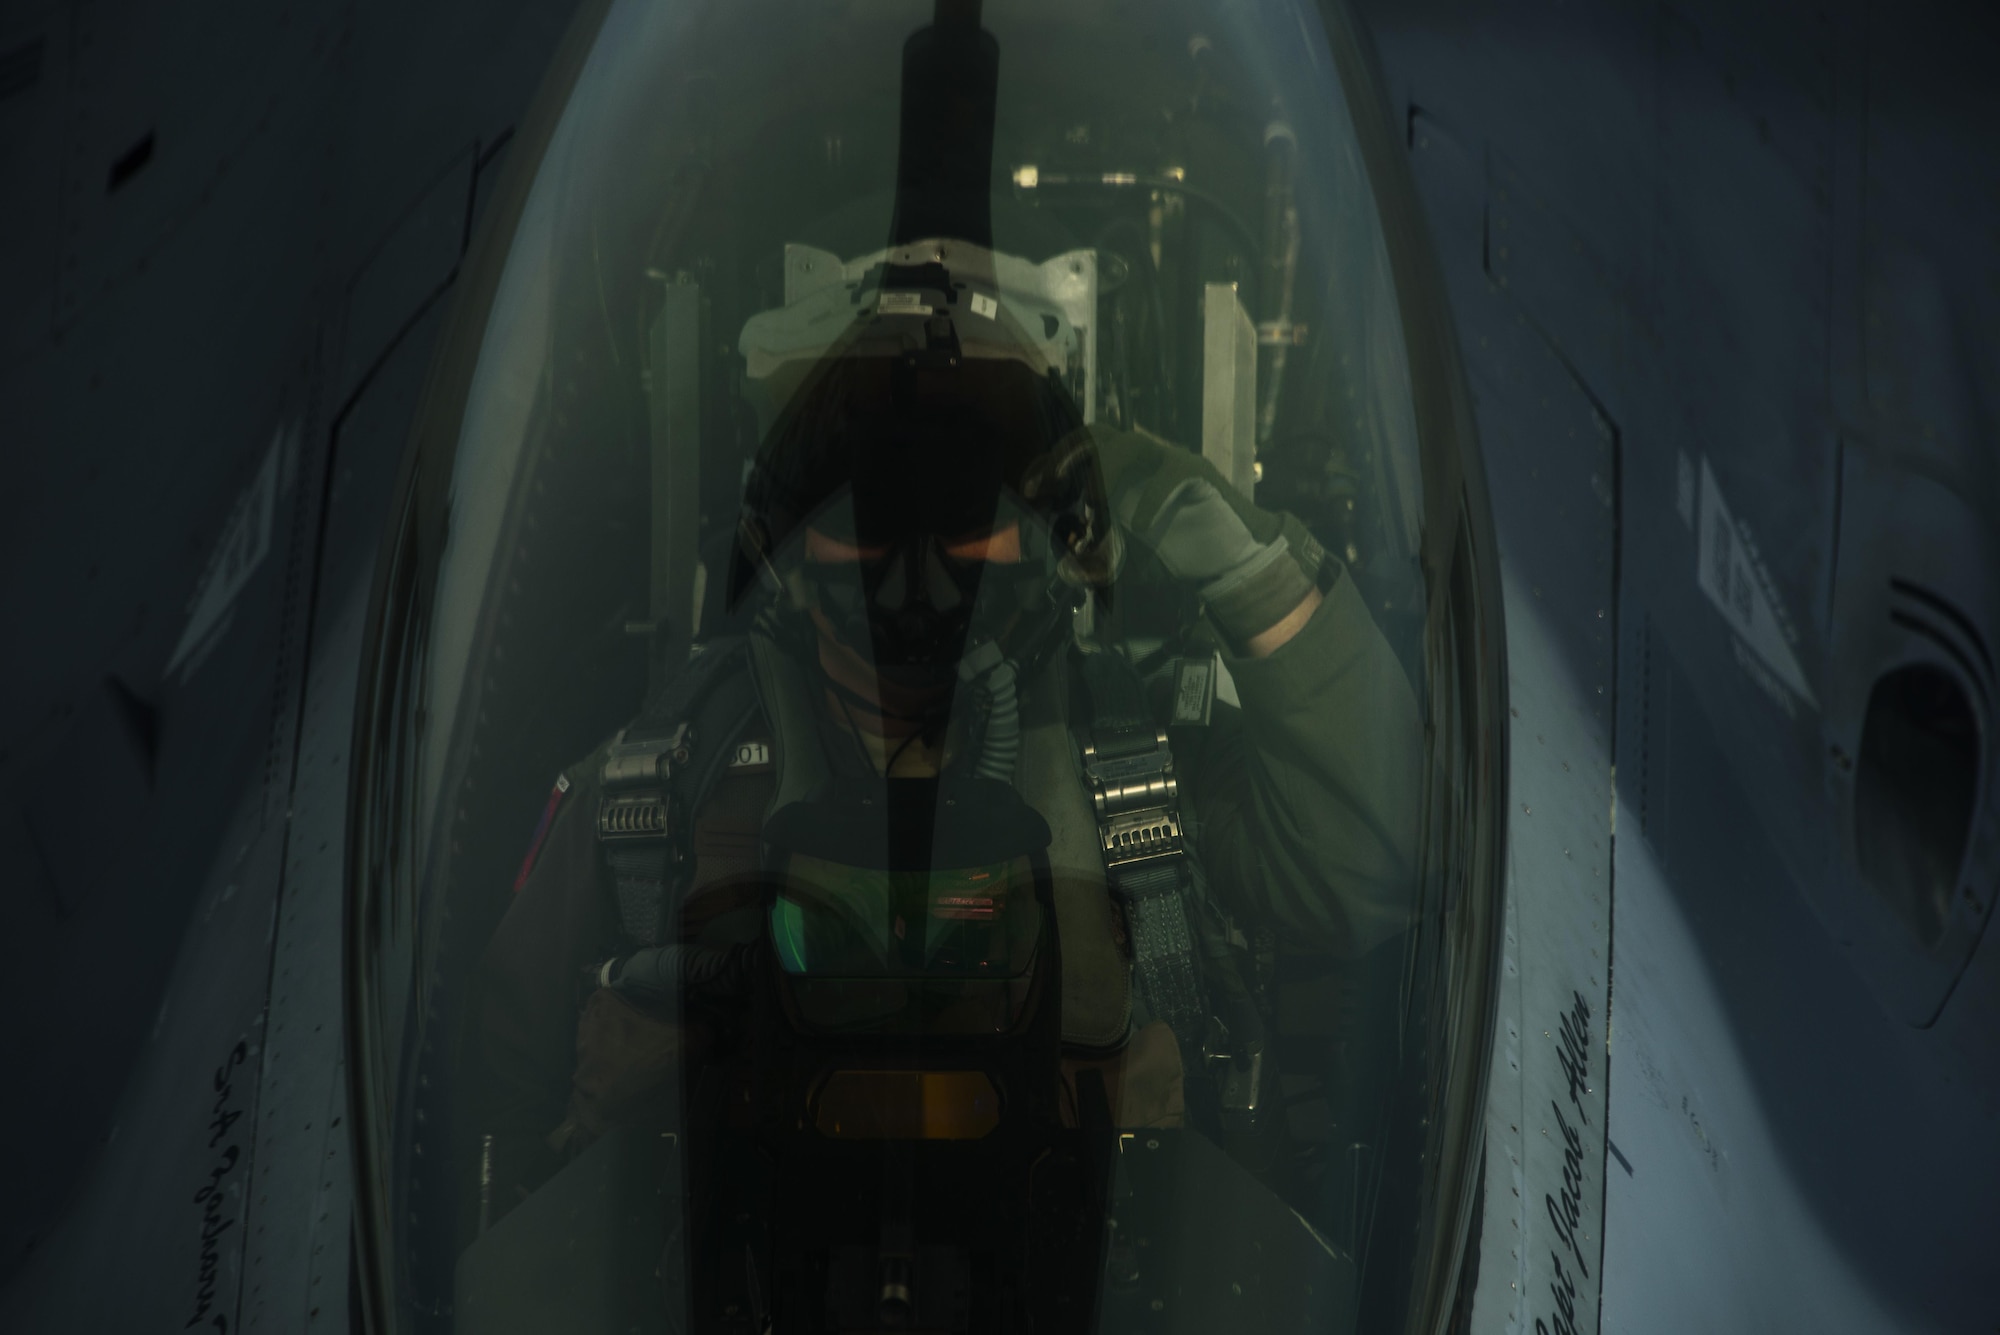 An F-16 Fighting Falcon, 510th Fighter Squadron, refuels from a KC-135R Stratotanker, 100th Air Refueling Wing, from RAF Mildenhall, England in support of Aviation Detachment rotation 17-3, exercise BALTOPS and exercise Saber Strike over Latvia, June 7, 2017. The U.S. Air Force is supporting this exercise with approximately 900 Airmen, eight F-16s from the 31st Fighter Wing, Aviano Air Base, Italy, four KC-135 Stratotankers from the 100th Air
Refueling Wing, RAF Mildenhall, U.S. Air Force Reserve 459th Air Refueling Wing, Joint Base Andrews, Maryland, one Air Force Reserve E-3 Airborne Warning and Control System (AWACS) from the 513th Aerial Control Group, B-52s from RAF Fairford, Tinker Air Force Base, Oklahoma and Airmen from the 1st Combat Communication Squadron, Ramstein Air Base, Germany are supporting this multinational exercise. (U.S. Air Force photo by Staff Sgt.
Jonathan Snyder)